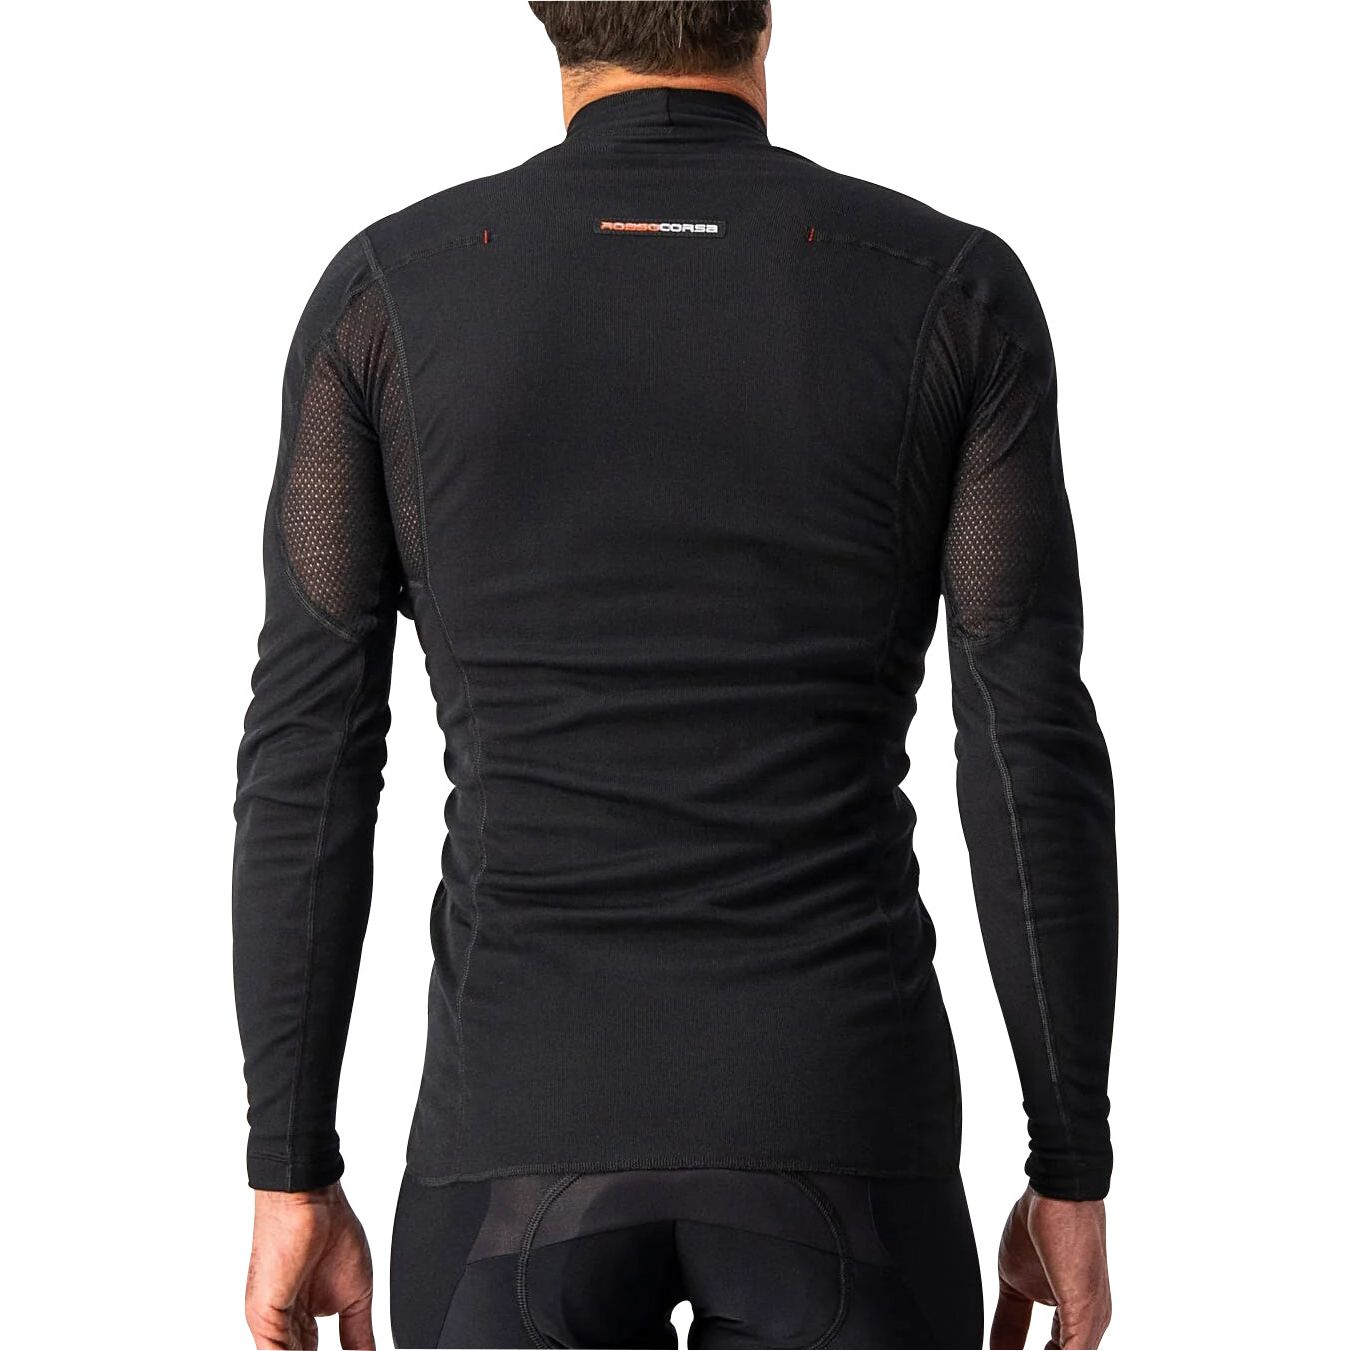 Castelli Flanders Warm Long Sleeve Base Layer Back View